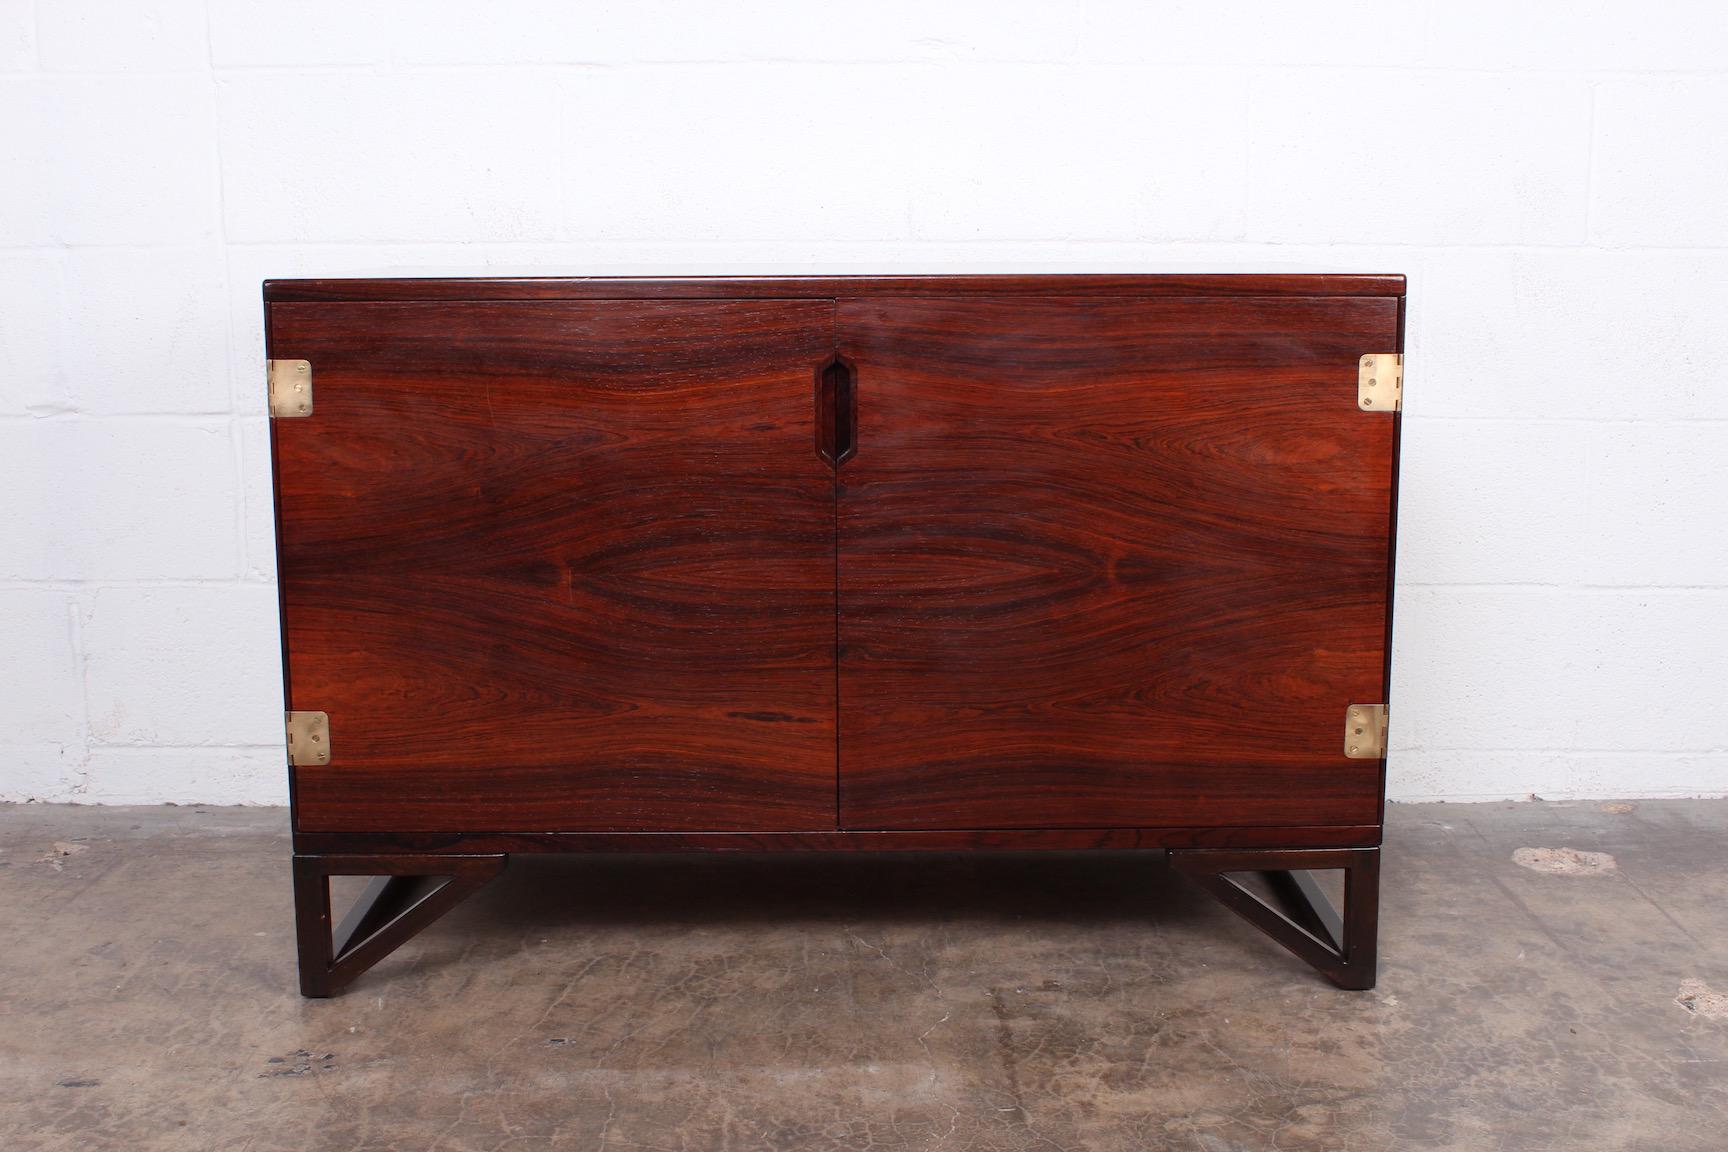 A rosewood cabinet with inset brass hinges and removable treys. Designed by Svend Langkilde.